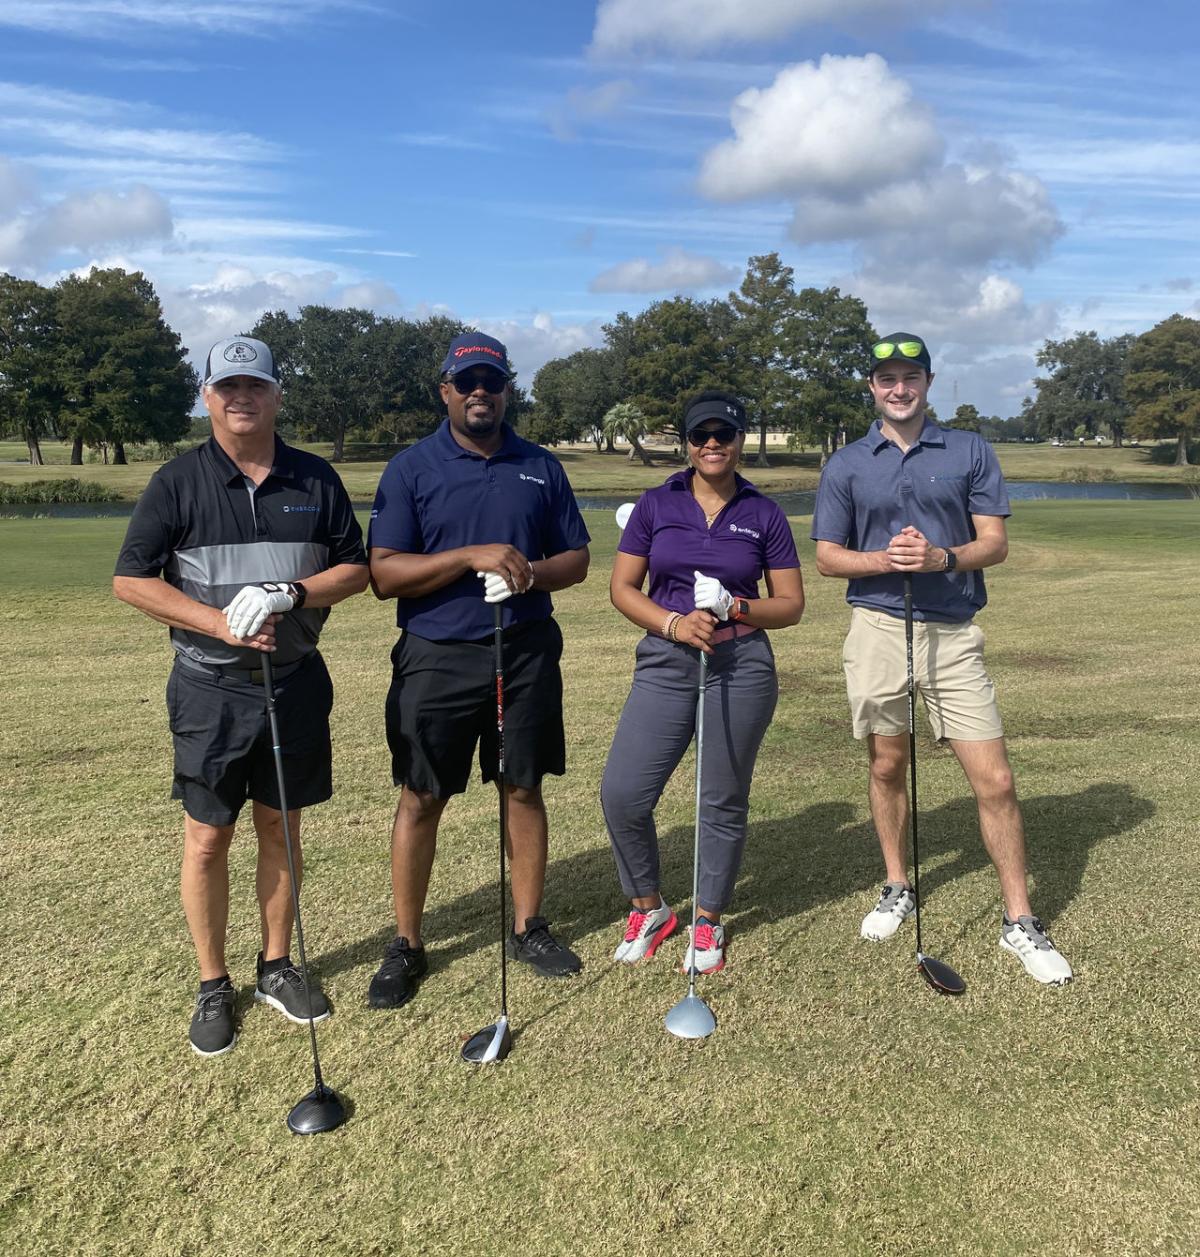 Four people holding golf clubs on a course